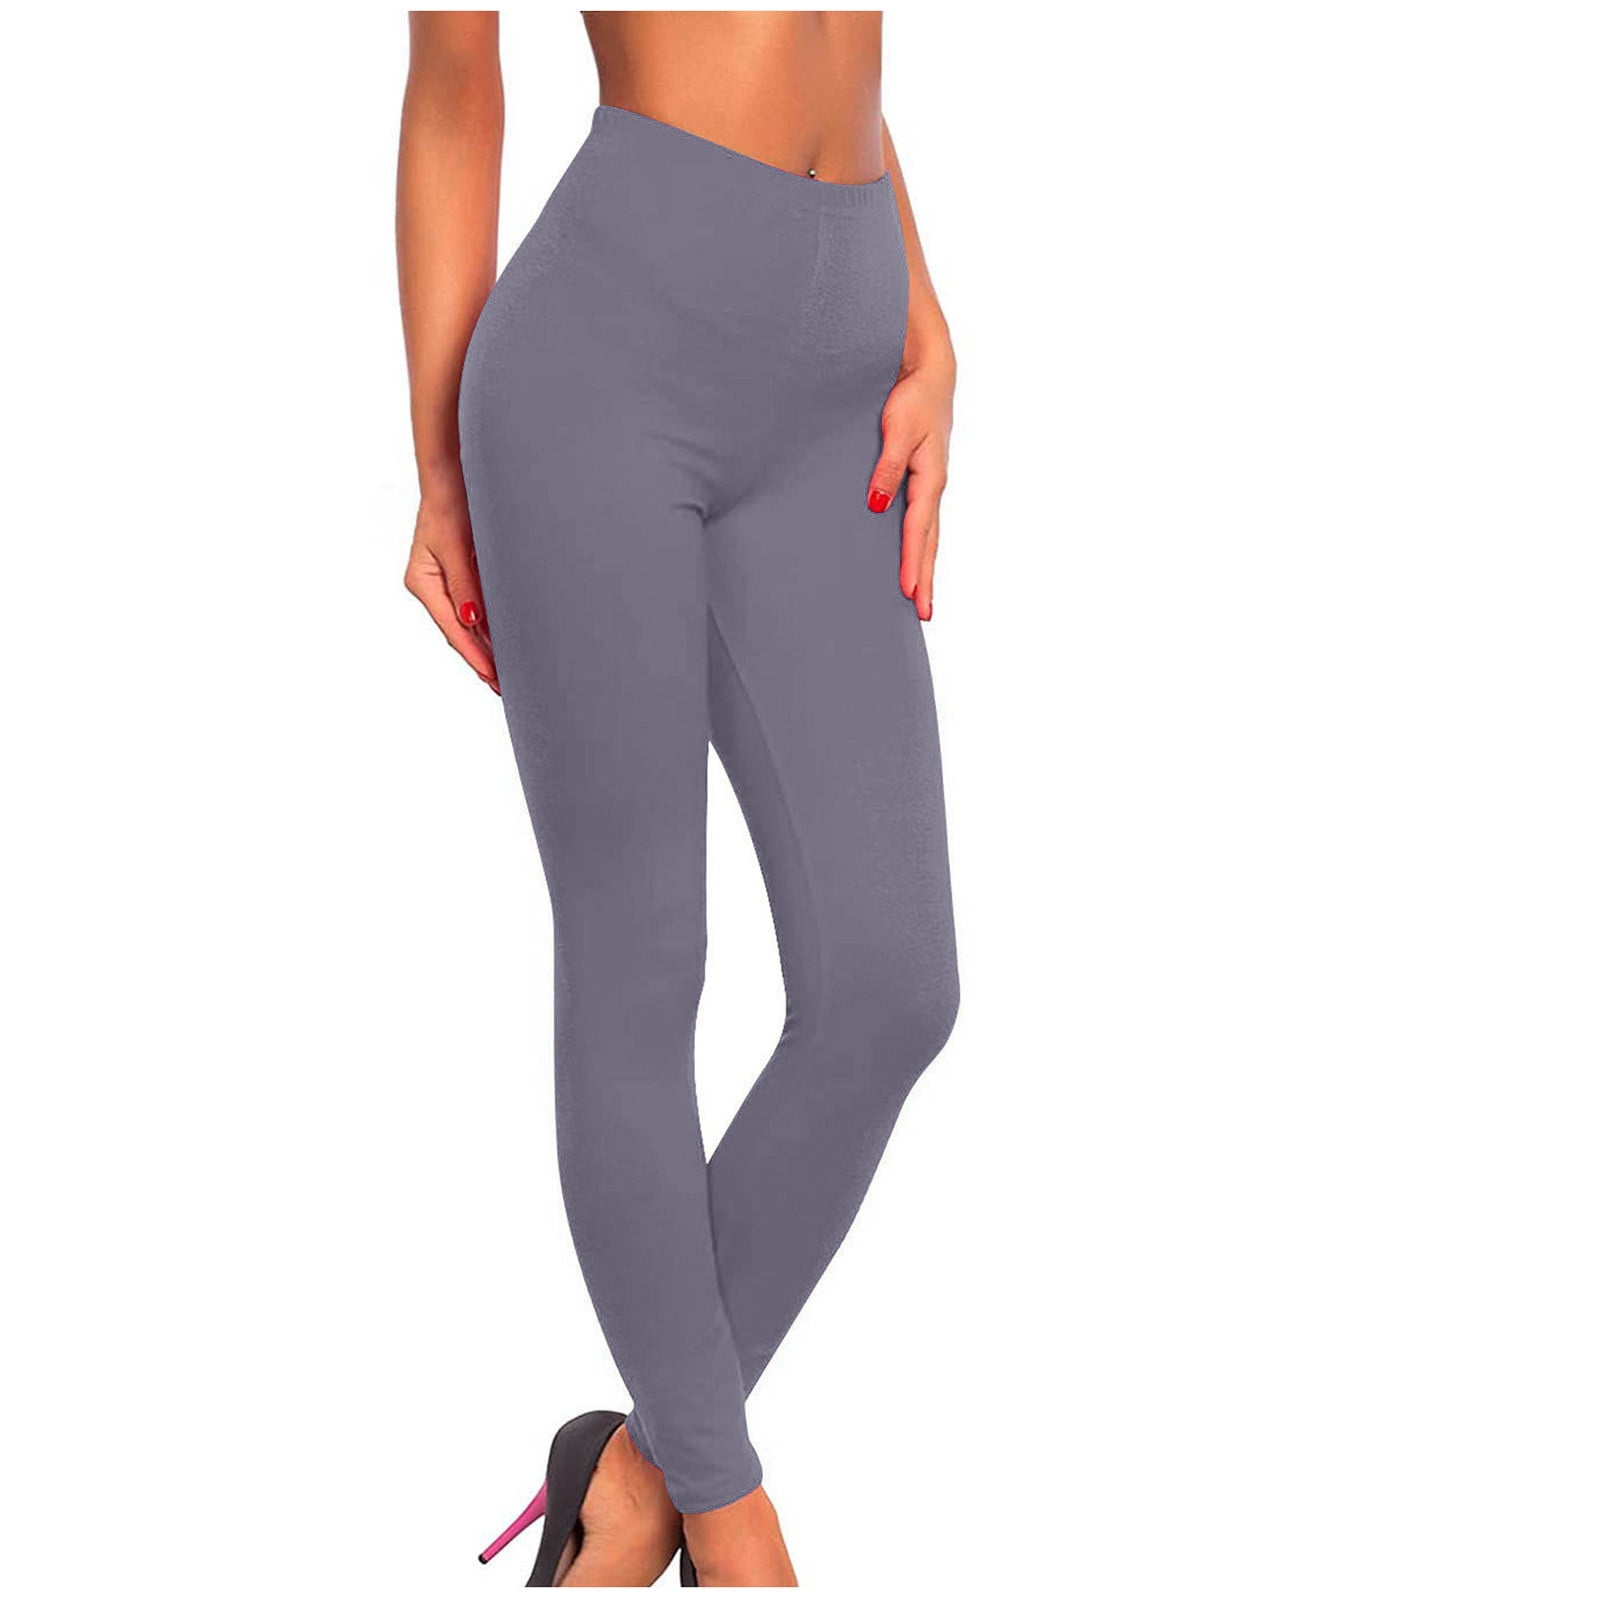 SMihono Deals Teen Girls Full Length Trousers Leggings Women's Sports  Fitness Pants Solid Colored CasualTight Fitting Tight Peach Hip Yoga Pants  Stretch Pants Gray 6 